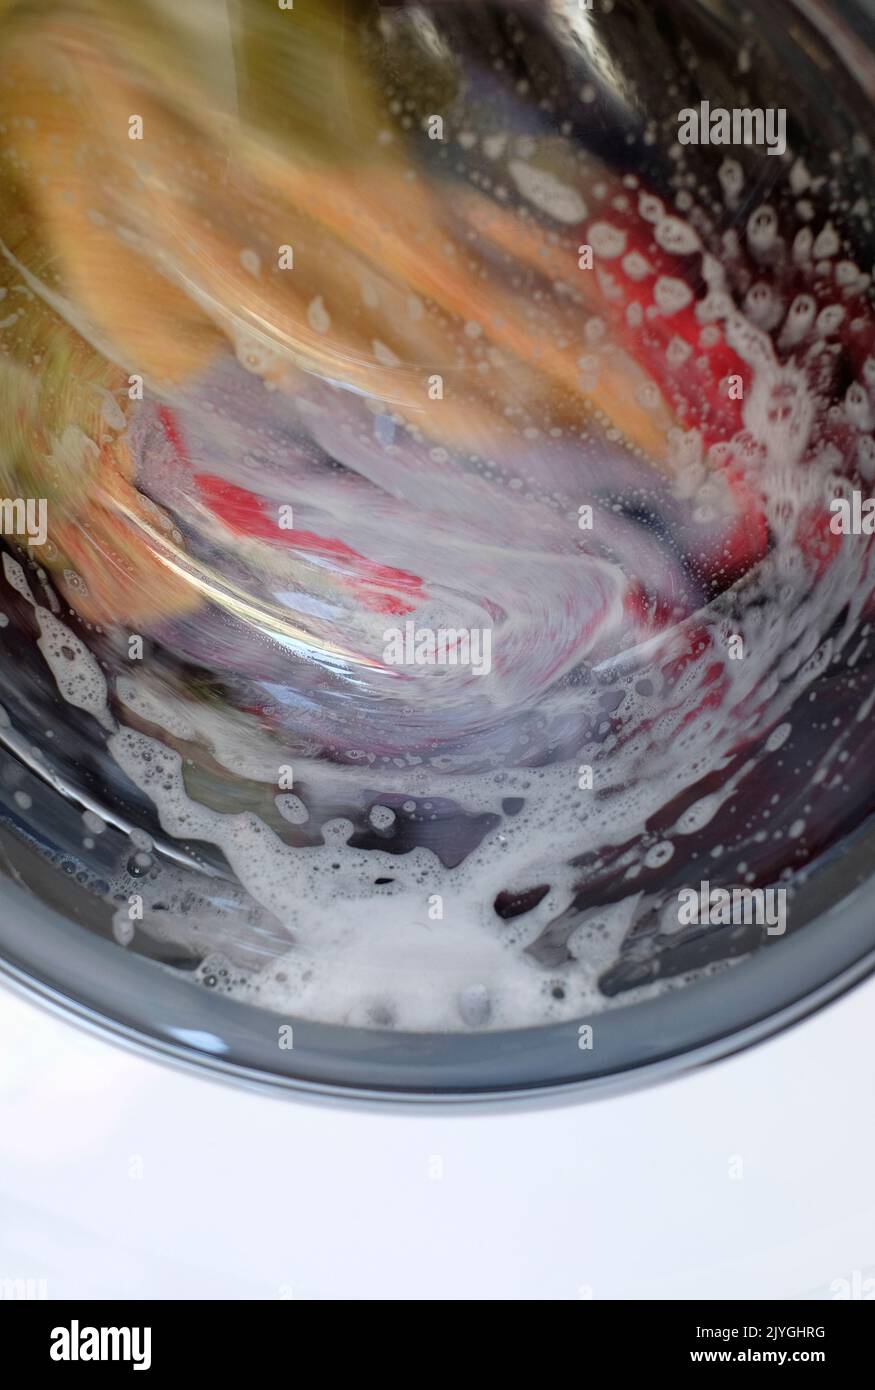 clothes spinning in washing machine Stock Photo